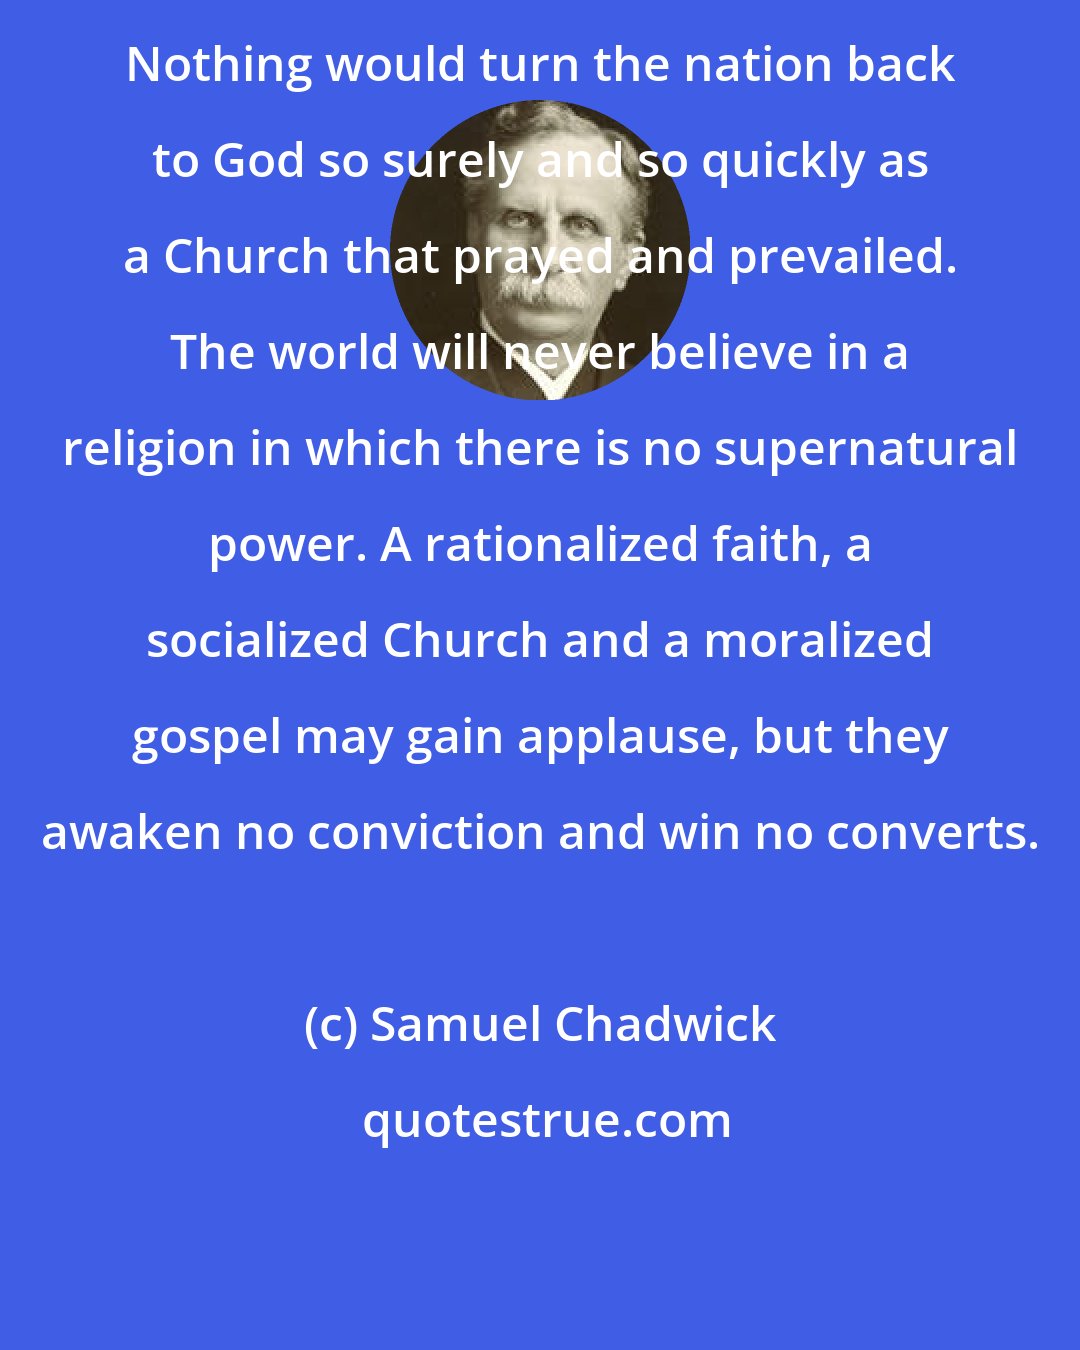 Samuel Chadwick: Nothing would turn the nation back to God so surely and so quickly as a Church that prayed and prevailed. The world will never believe in a religion in which there is no supernatural power. A rationalized faith, a socialized Church and a moralized gospel may gain applause, but they awaken no conviction and win no converts.